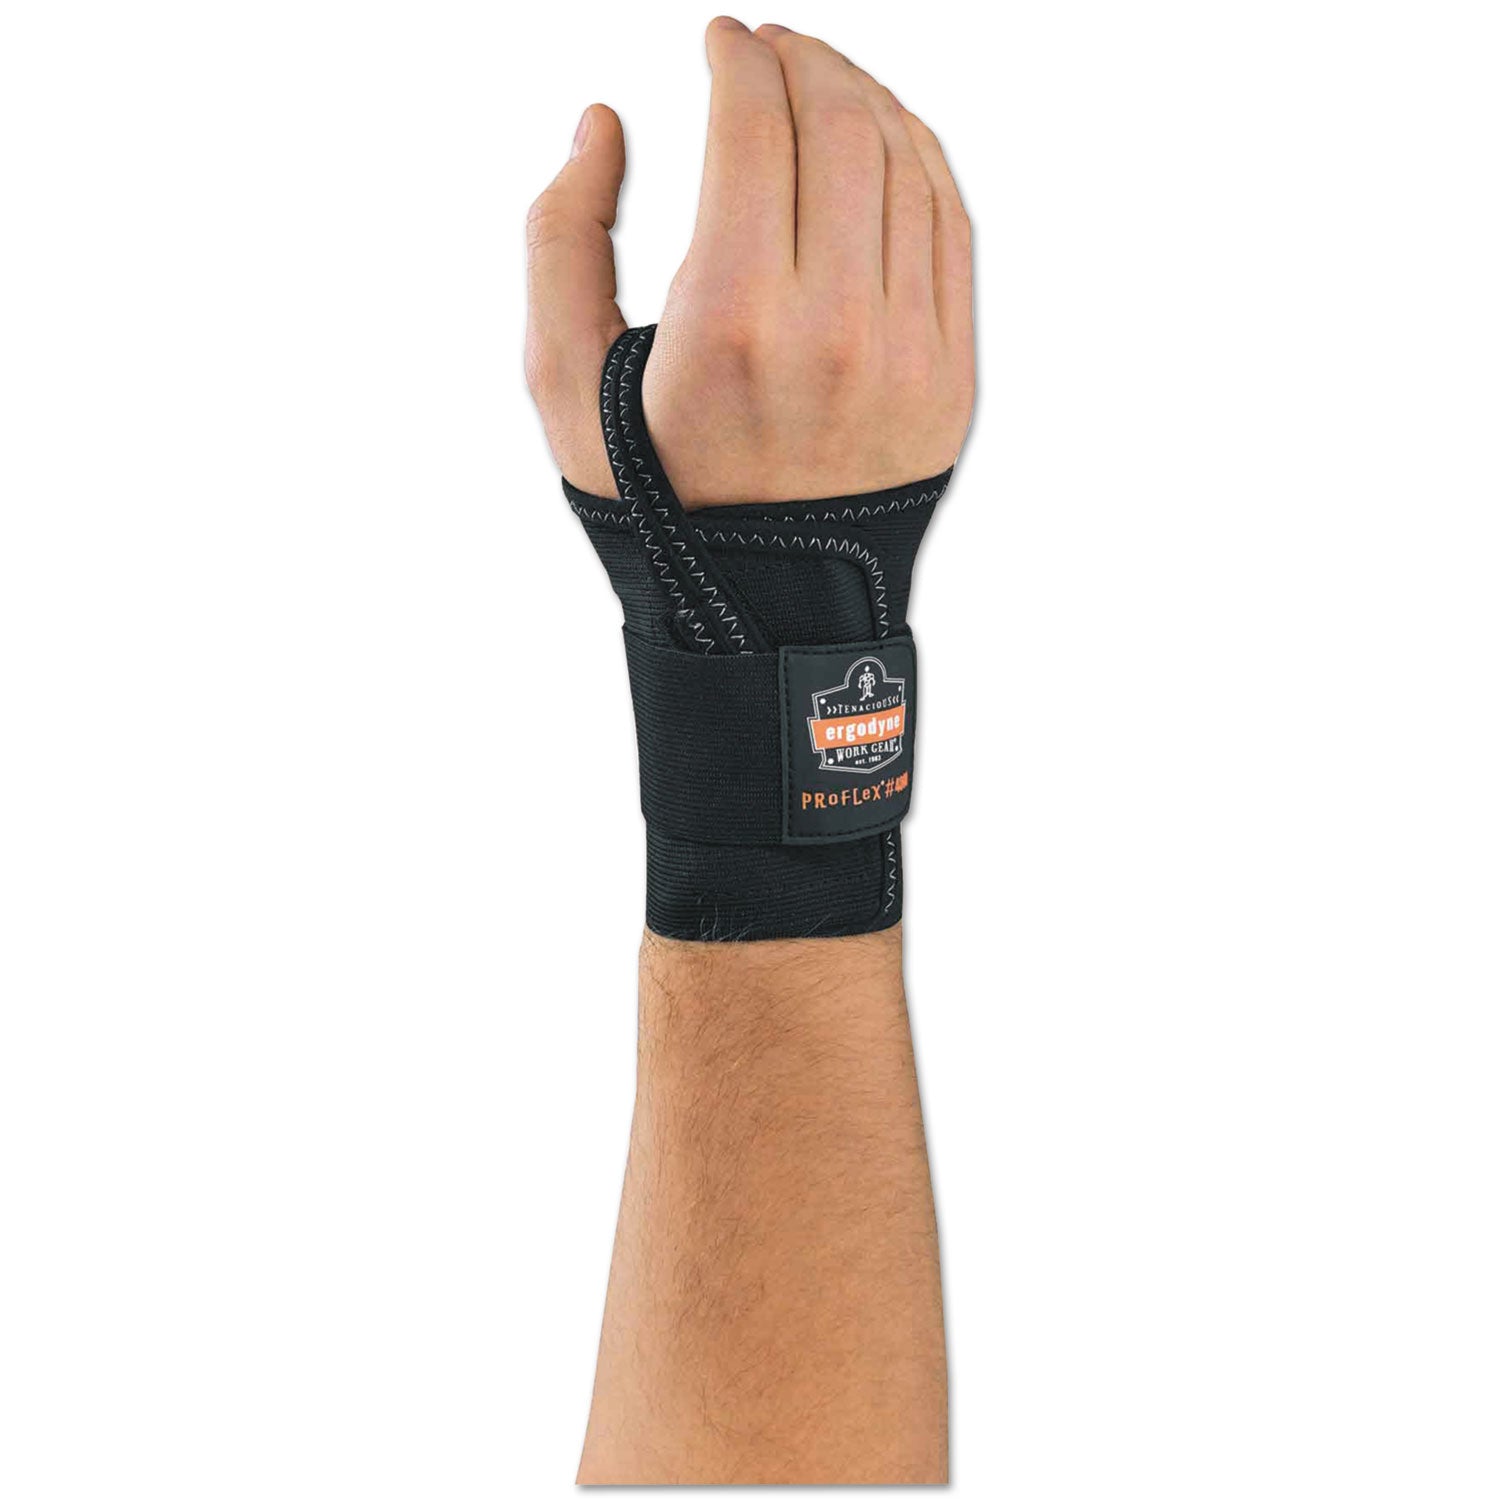 ProFlex 4000 Wrist Support, X-Large (8"+), Fits Right-Hand, Black, Ships in 1-3 Business Days - 